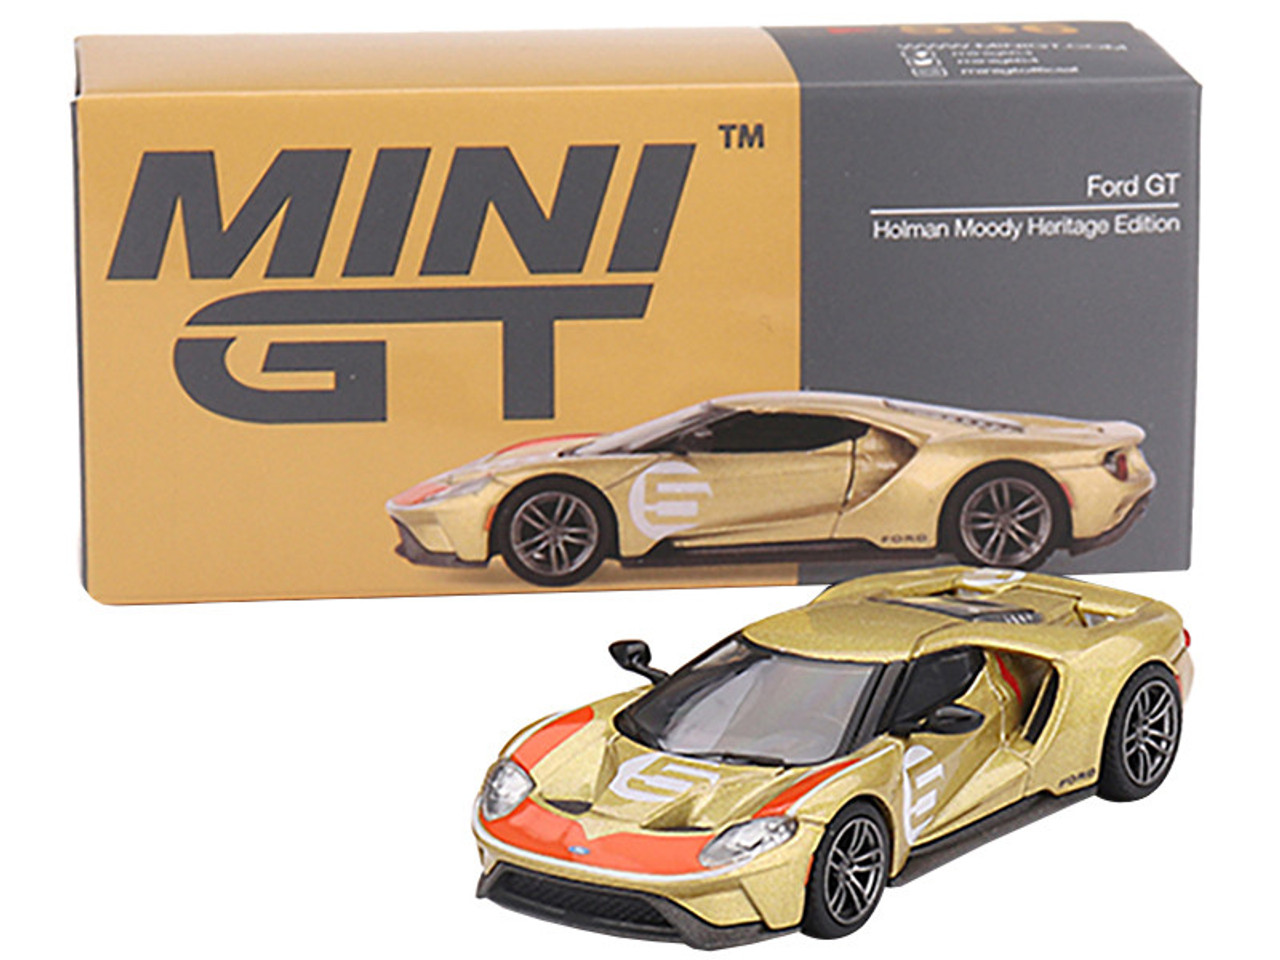 Ford GT #5 "Holman Moody Heritage Edition" Gold Metallic with Red Accents Limited Edition to 1800 pieces Worldwide 1/64 Diecast Model Car by True Scale Miniatures